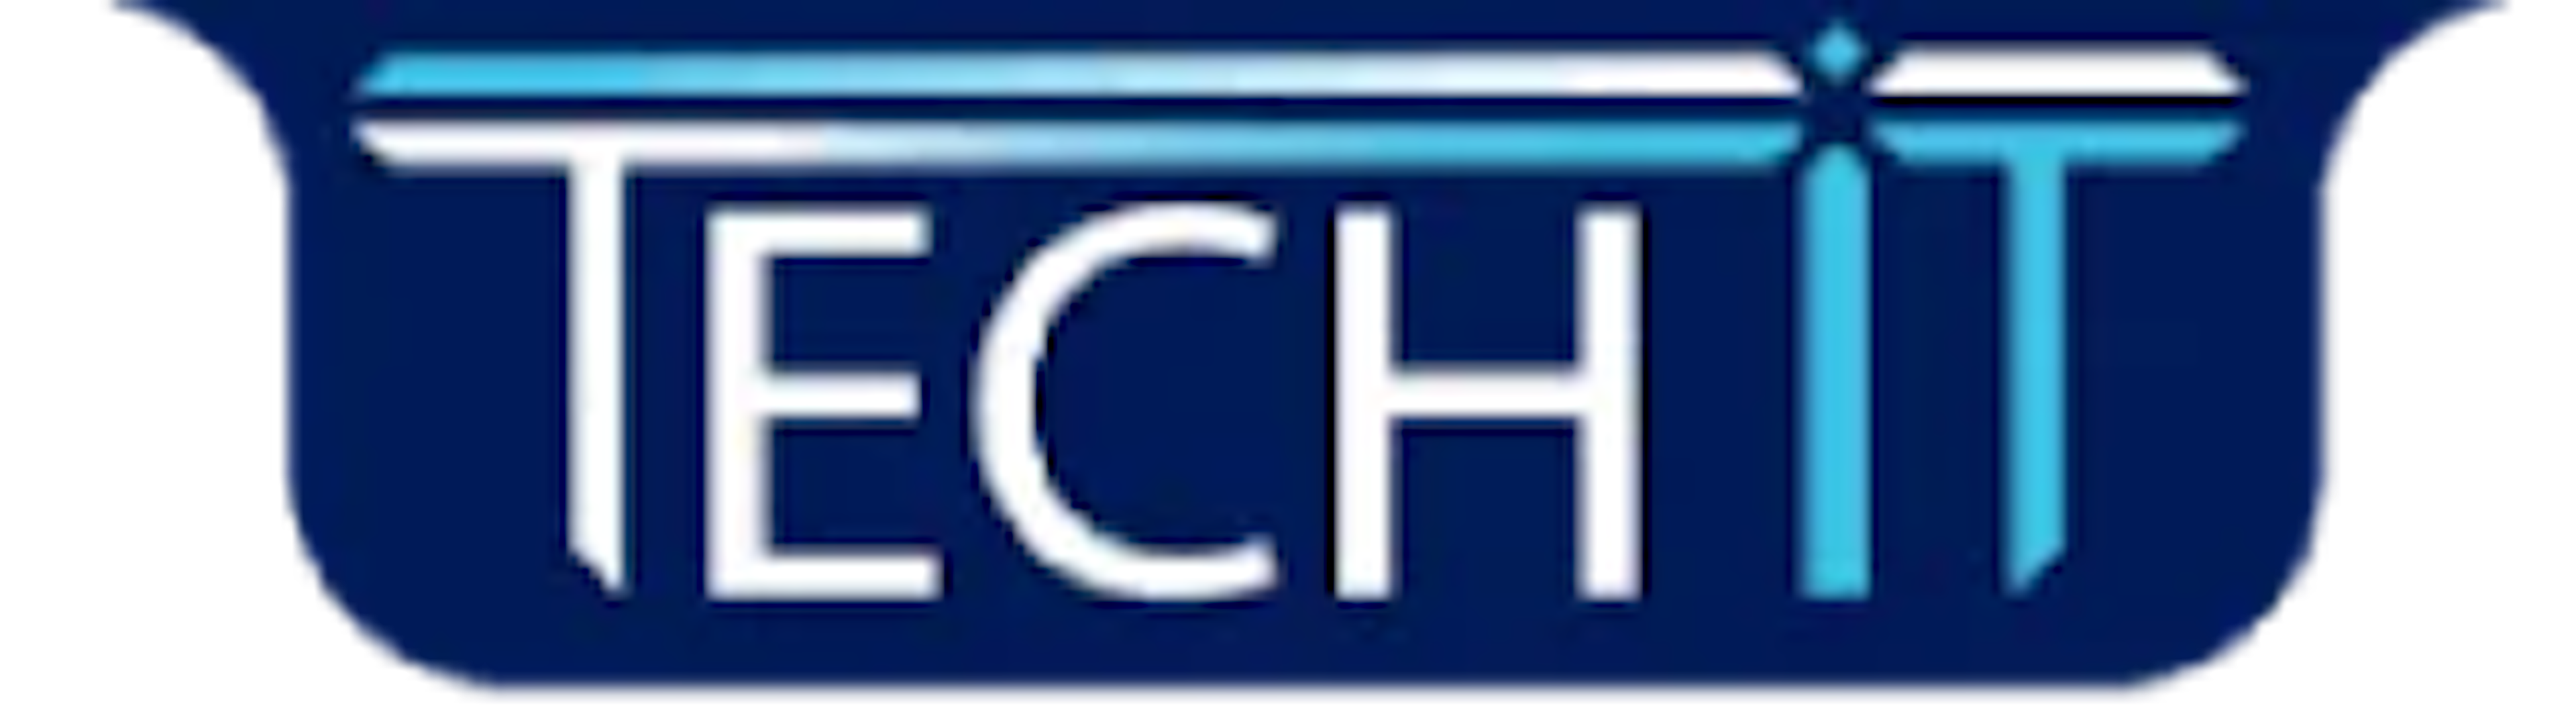 TechiT Services